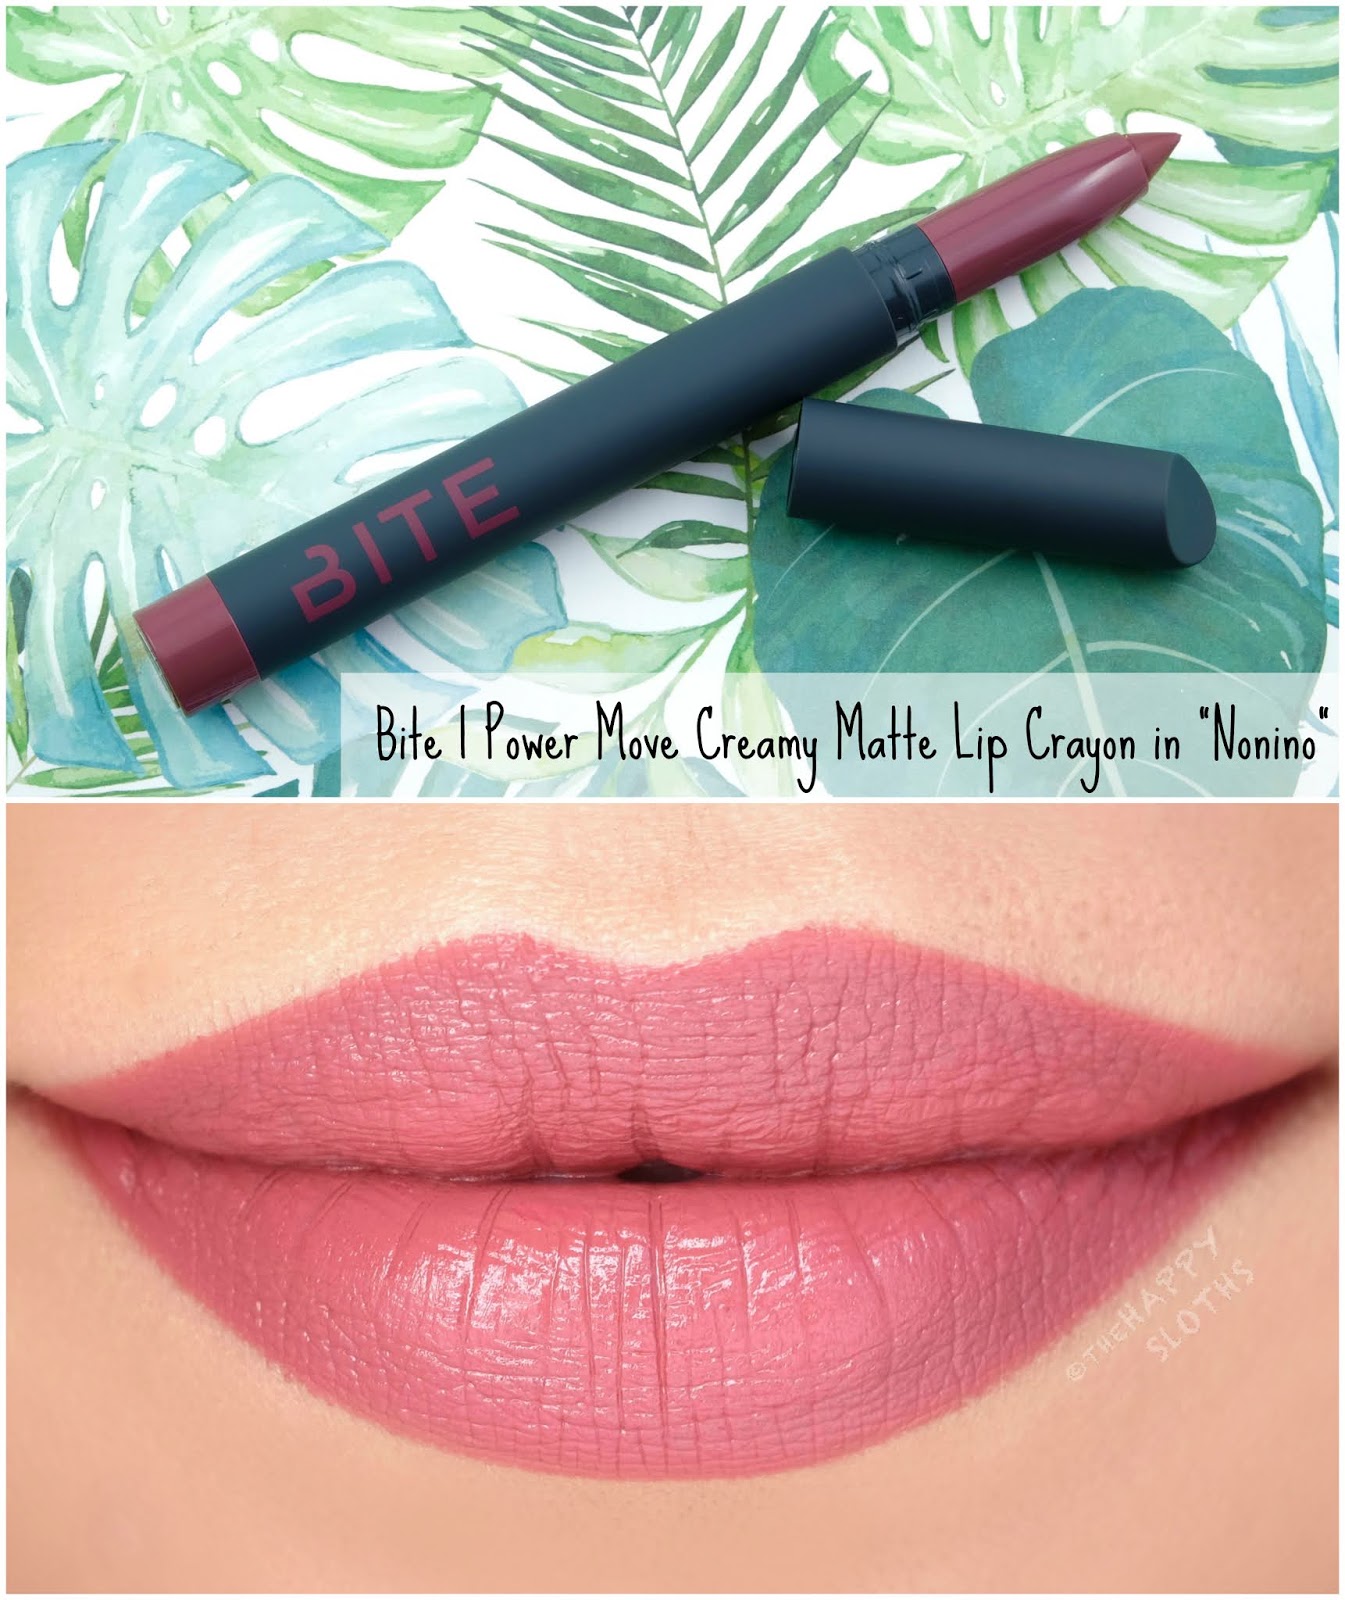 Bite Beauty | Power Move Creamy Matte Lip Crayon: Review and Swatches